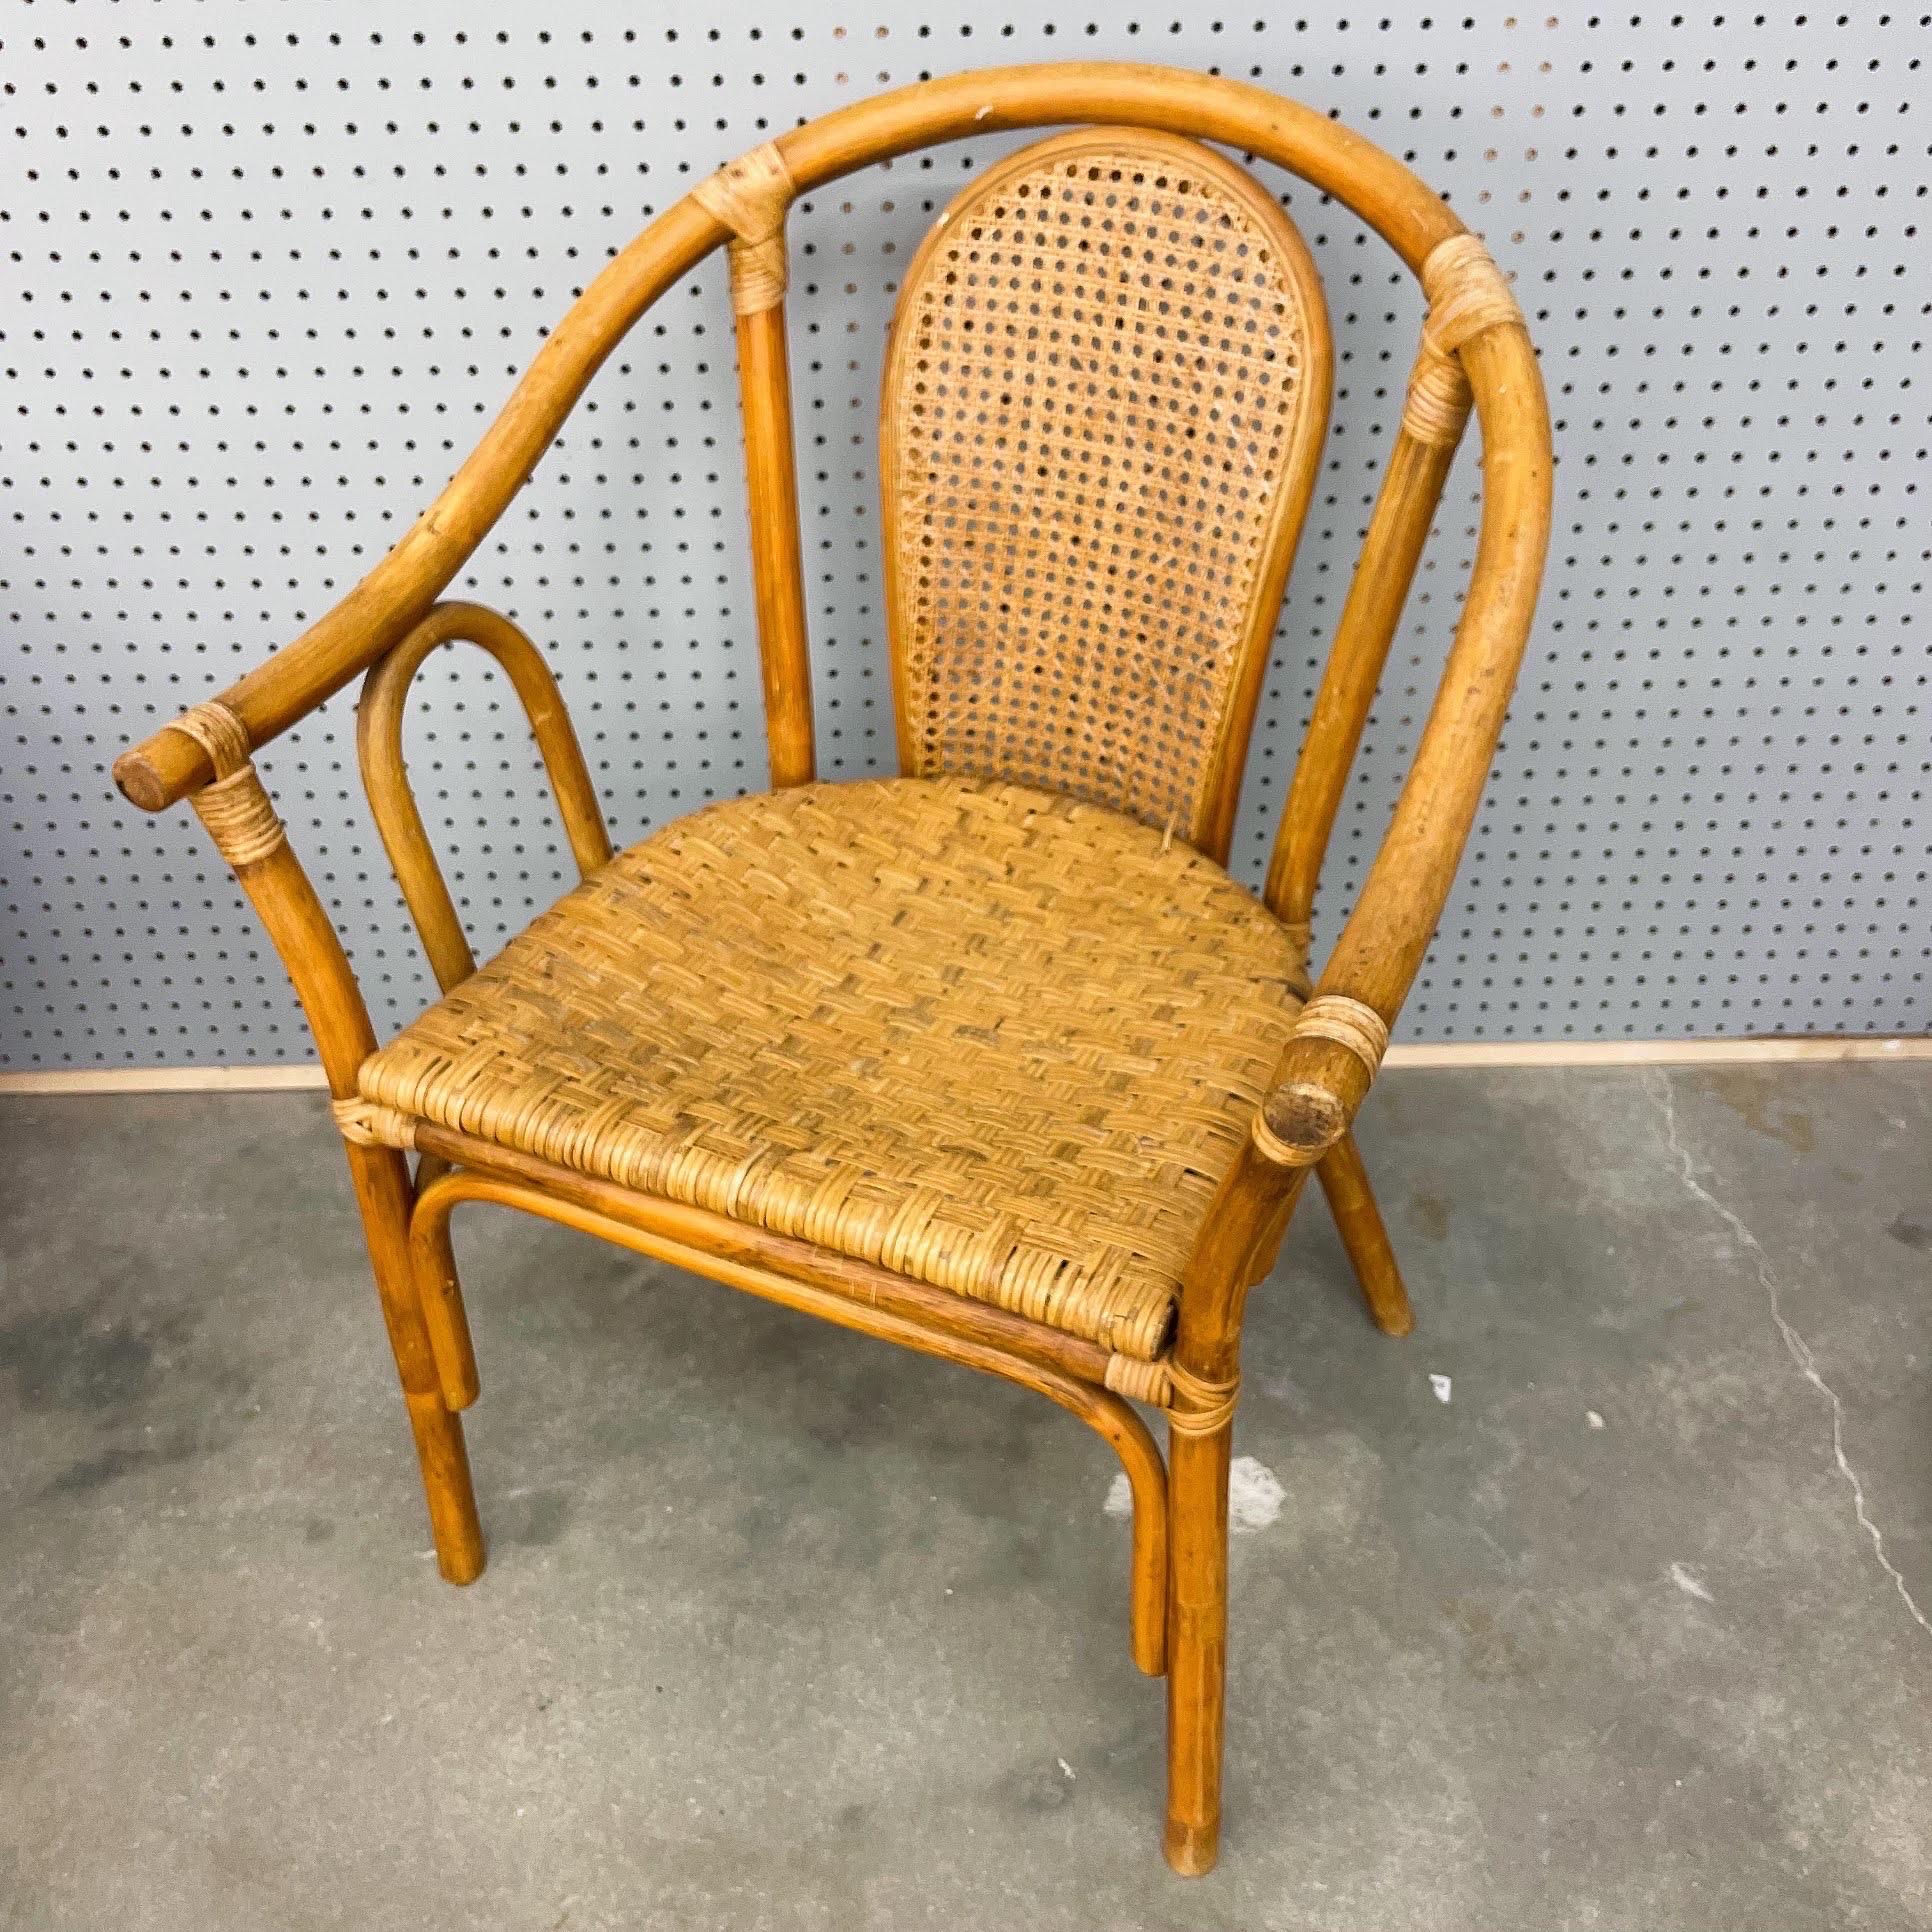 Mid 20th Century Bamboo Rattan Dining Chairs With Cane Inset Back - Set of 4 For Sale 5